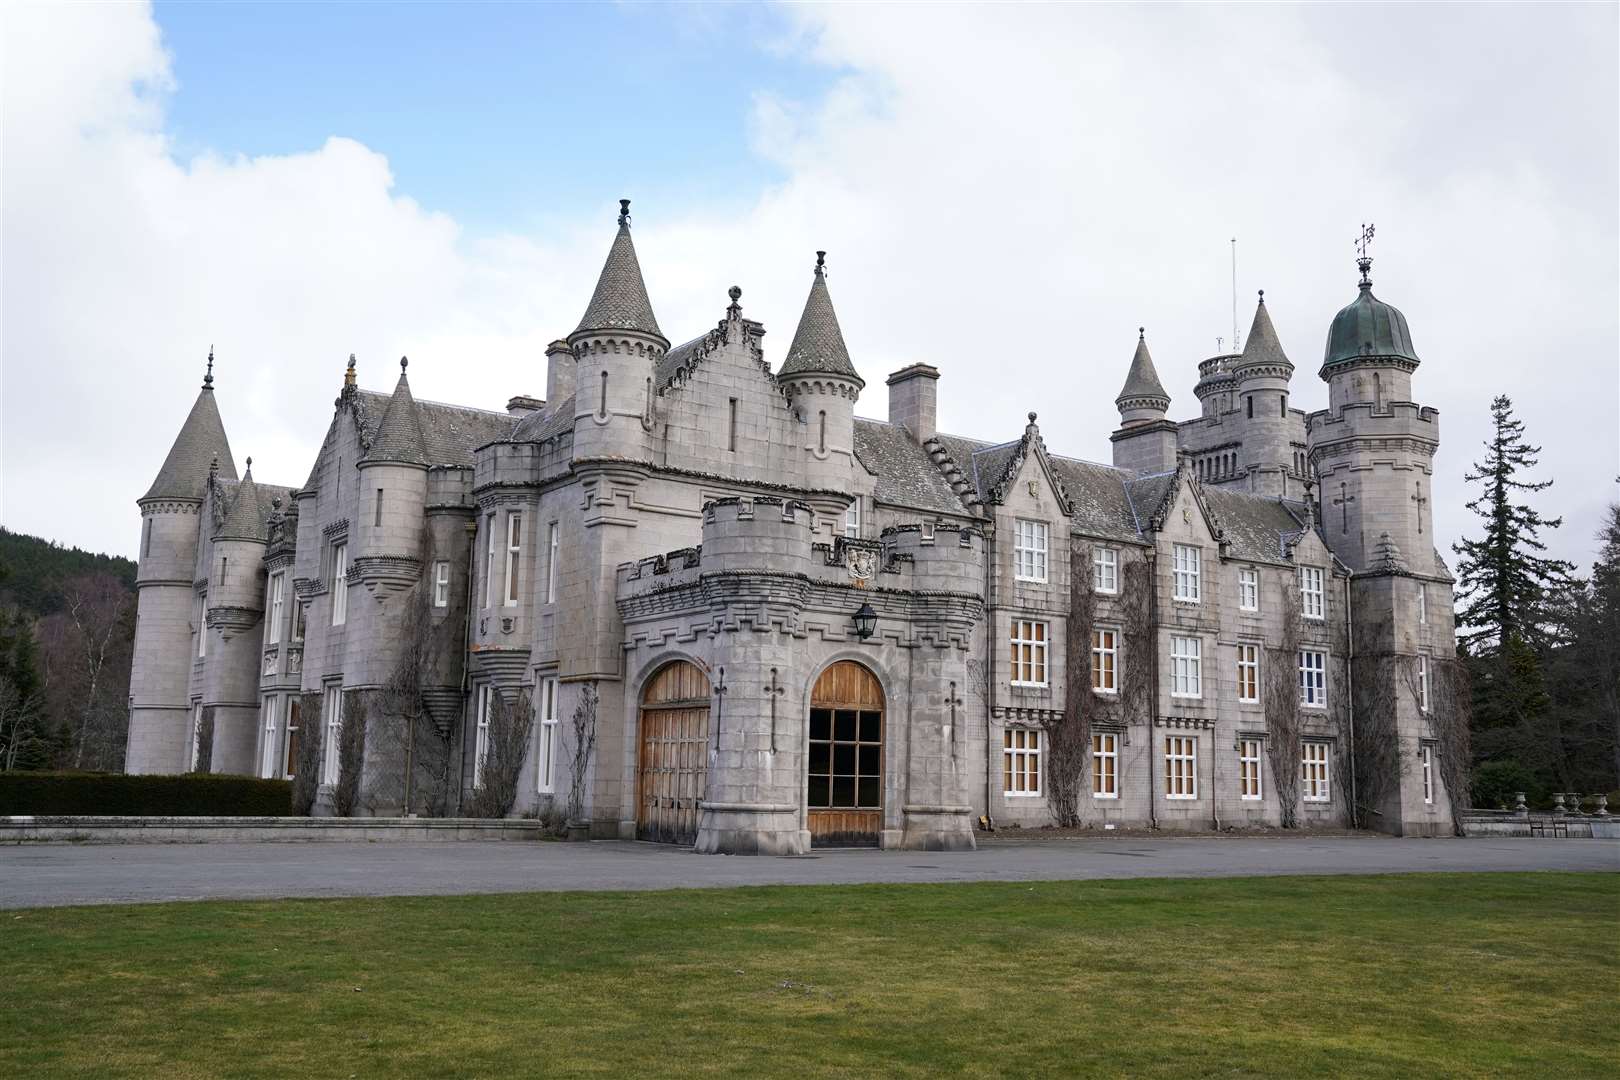 Balmoral Castle, where the royals often spend the summer (PA)